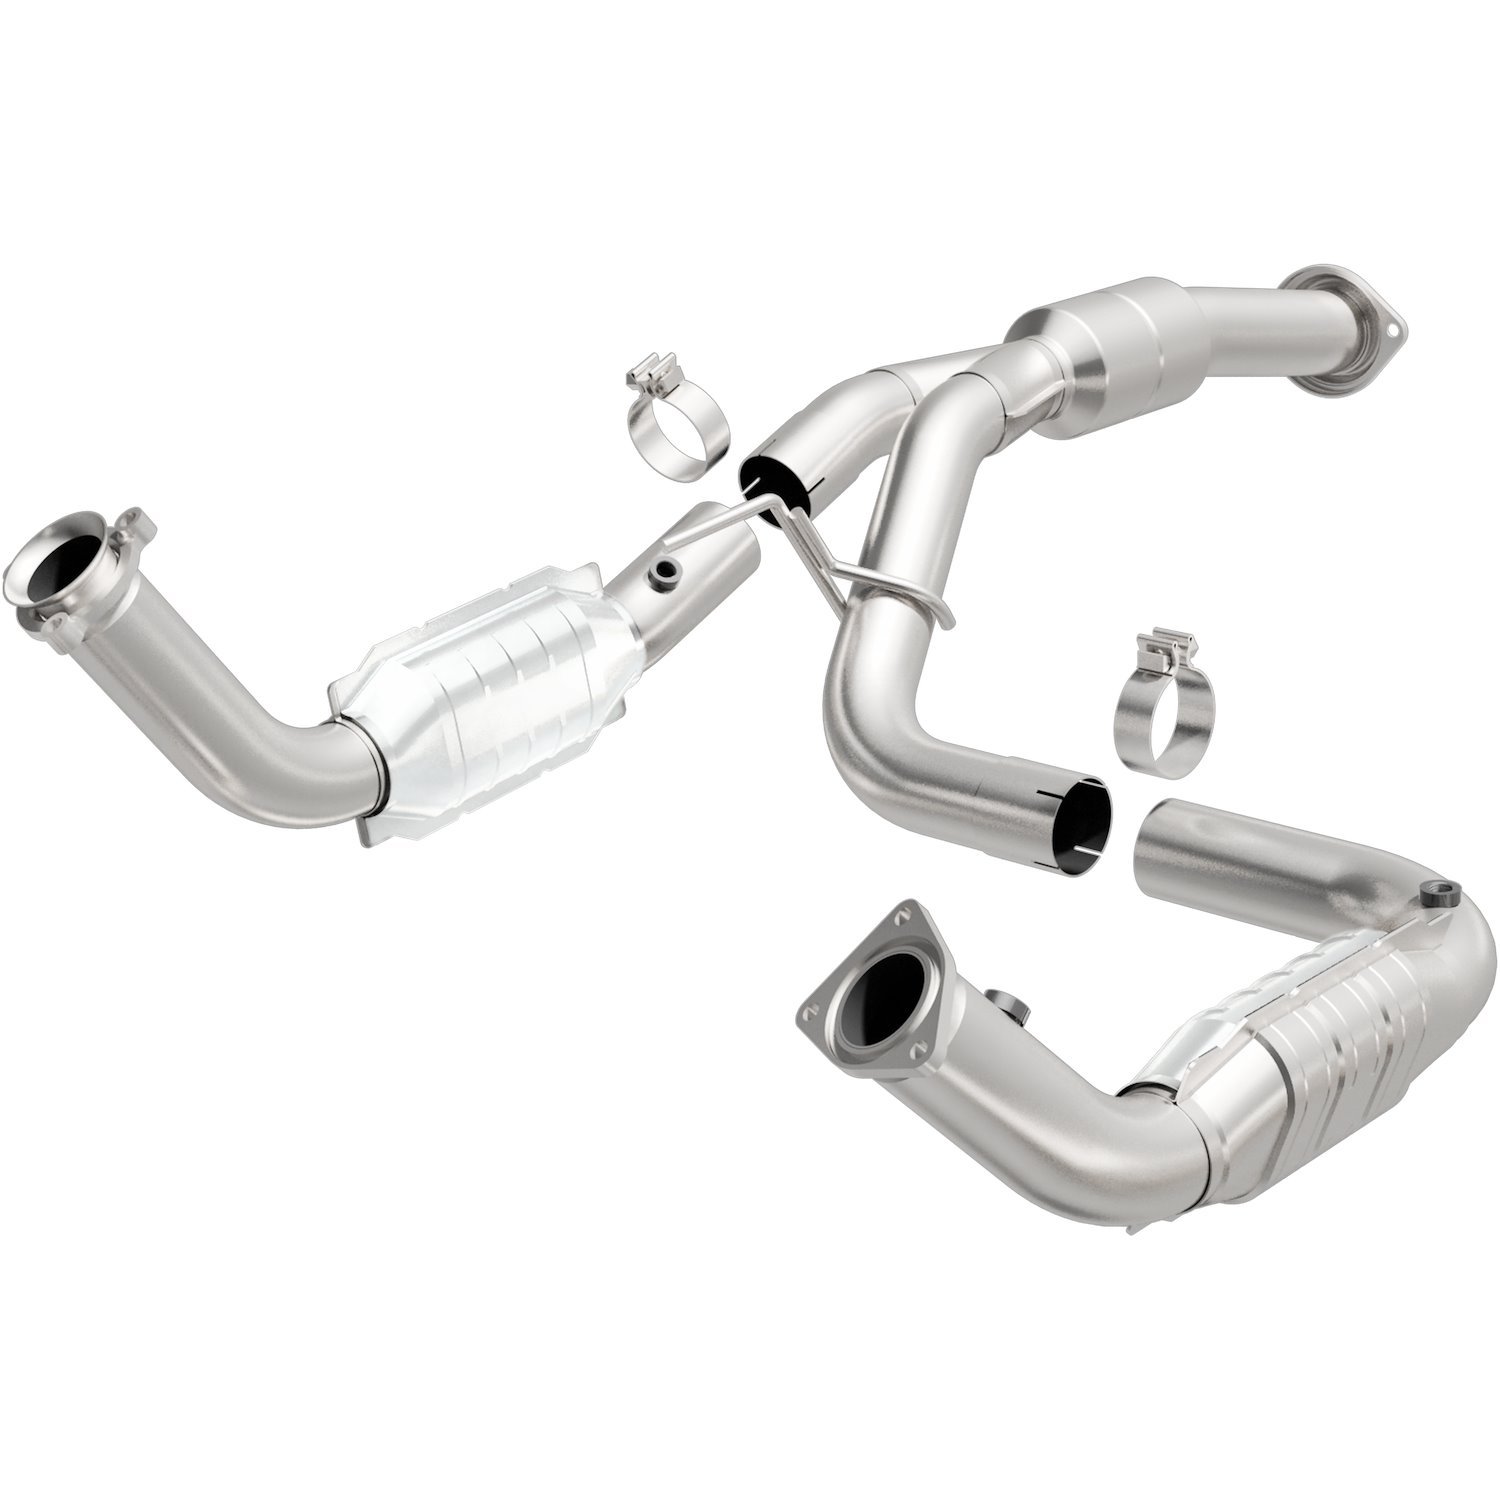 OEM Grade Federal / EPA Compliant Direct-Fit Catalytic Converter 51812